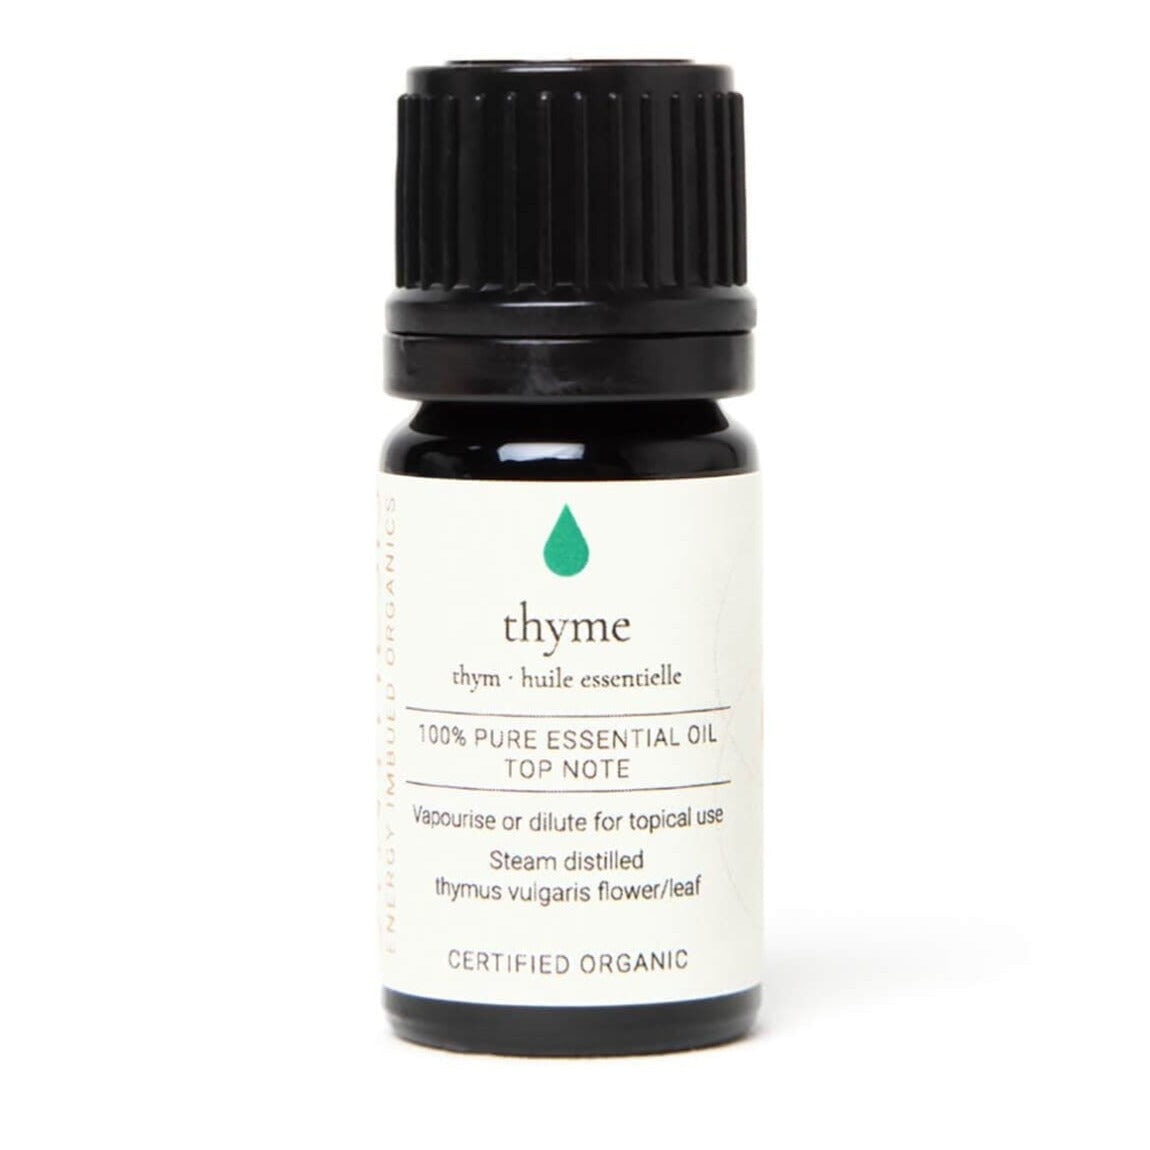 Thyme Certified Organic Essential Oil Refill aroma Synthesis Organics 